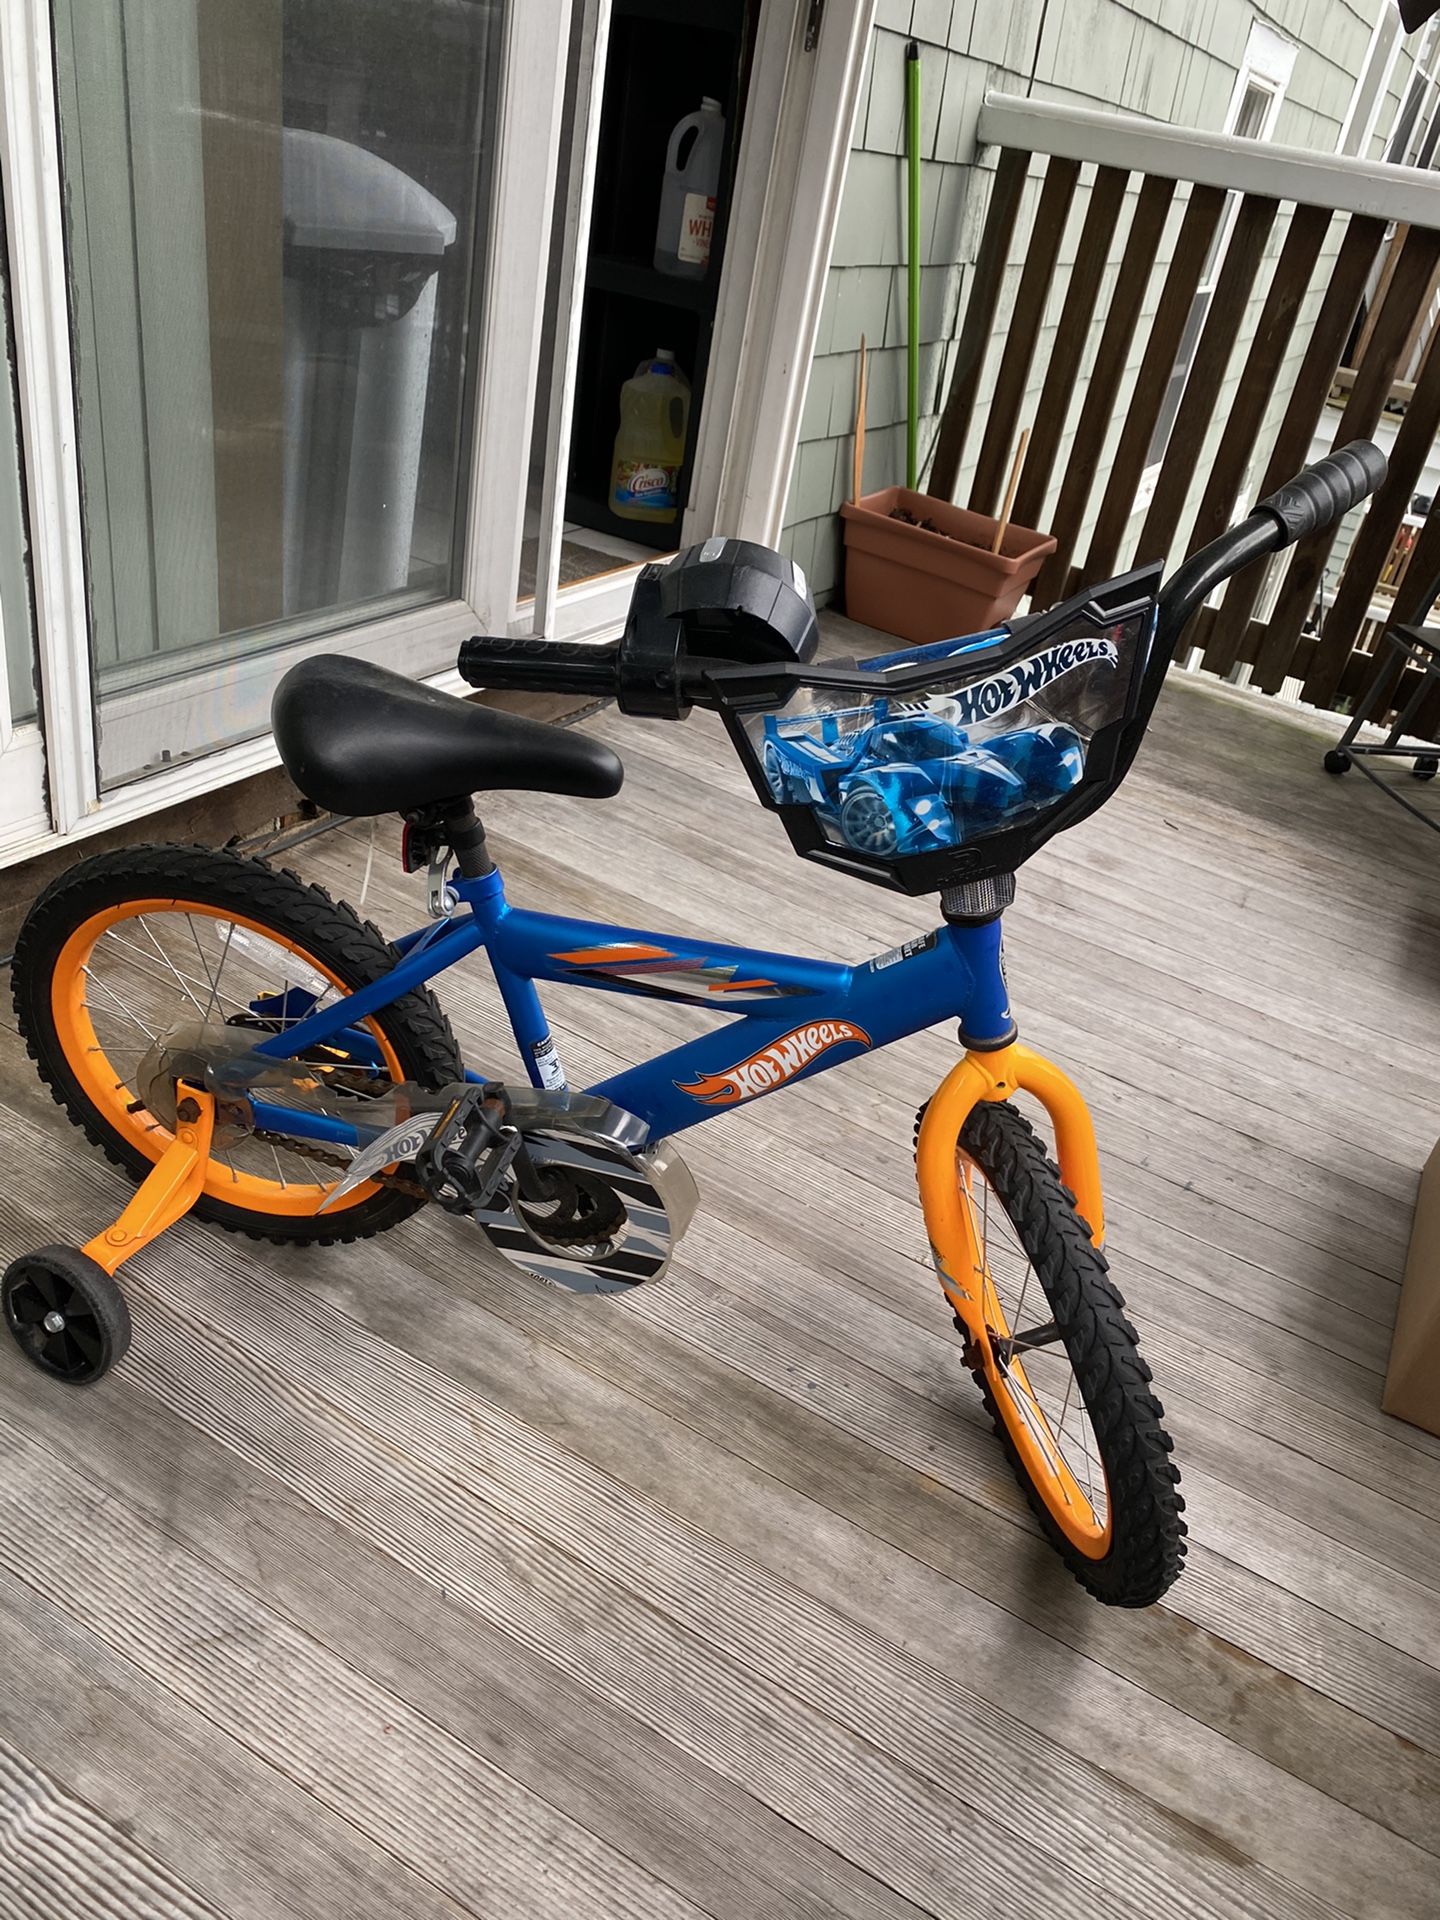 Bike for a kid perfect to go out and enjoy weather!